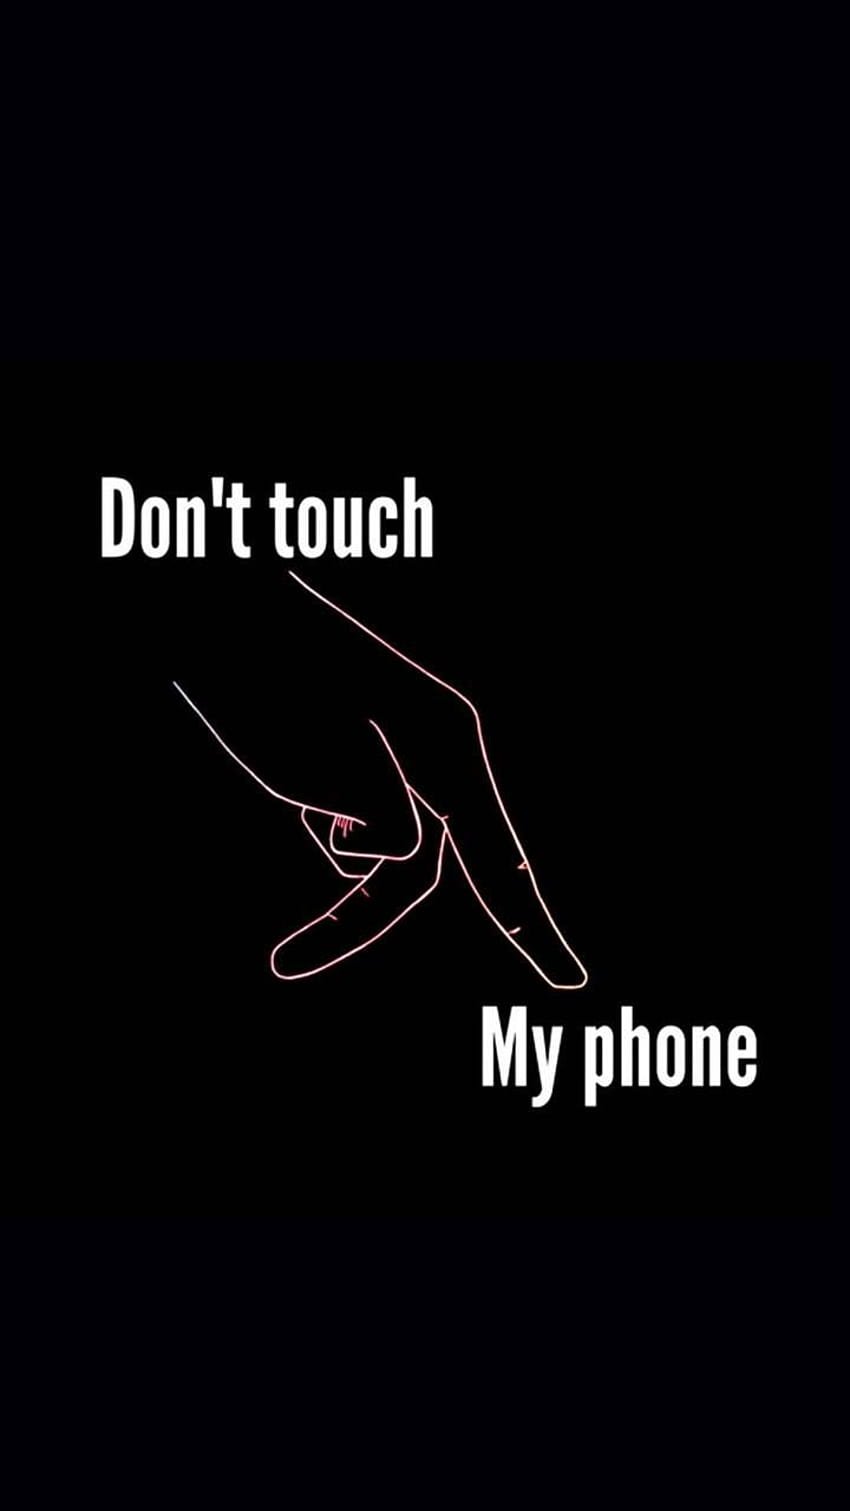 Pin on Dont touch my phone, lock screen phone HD phone wallpaper